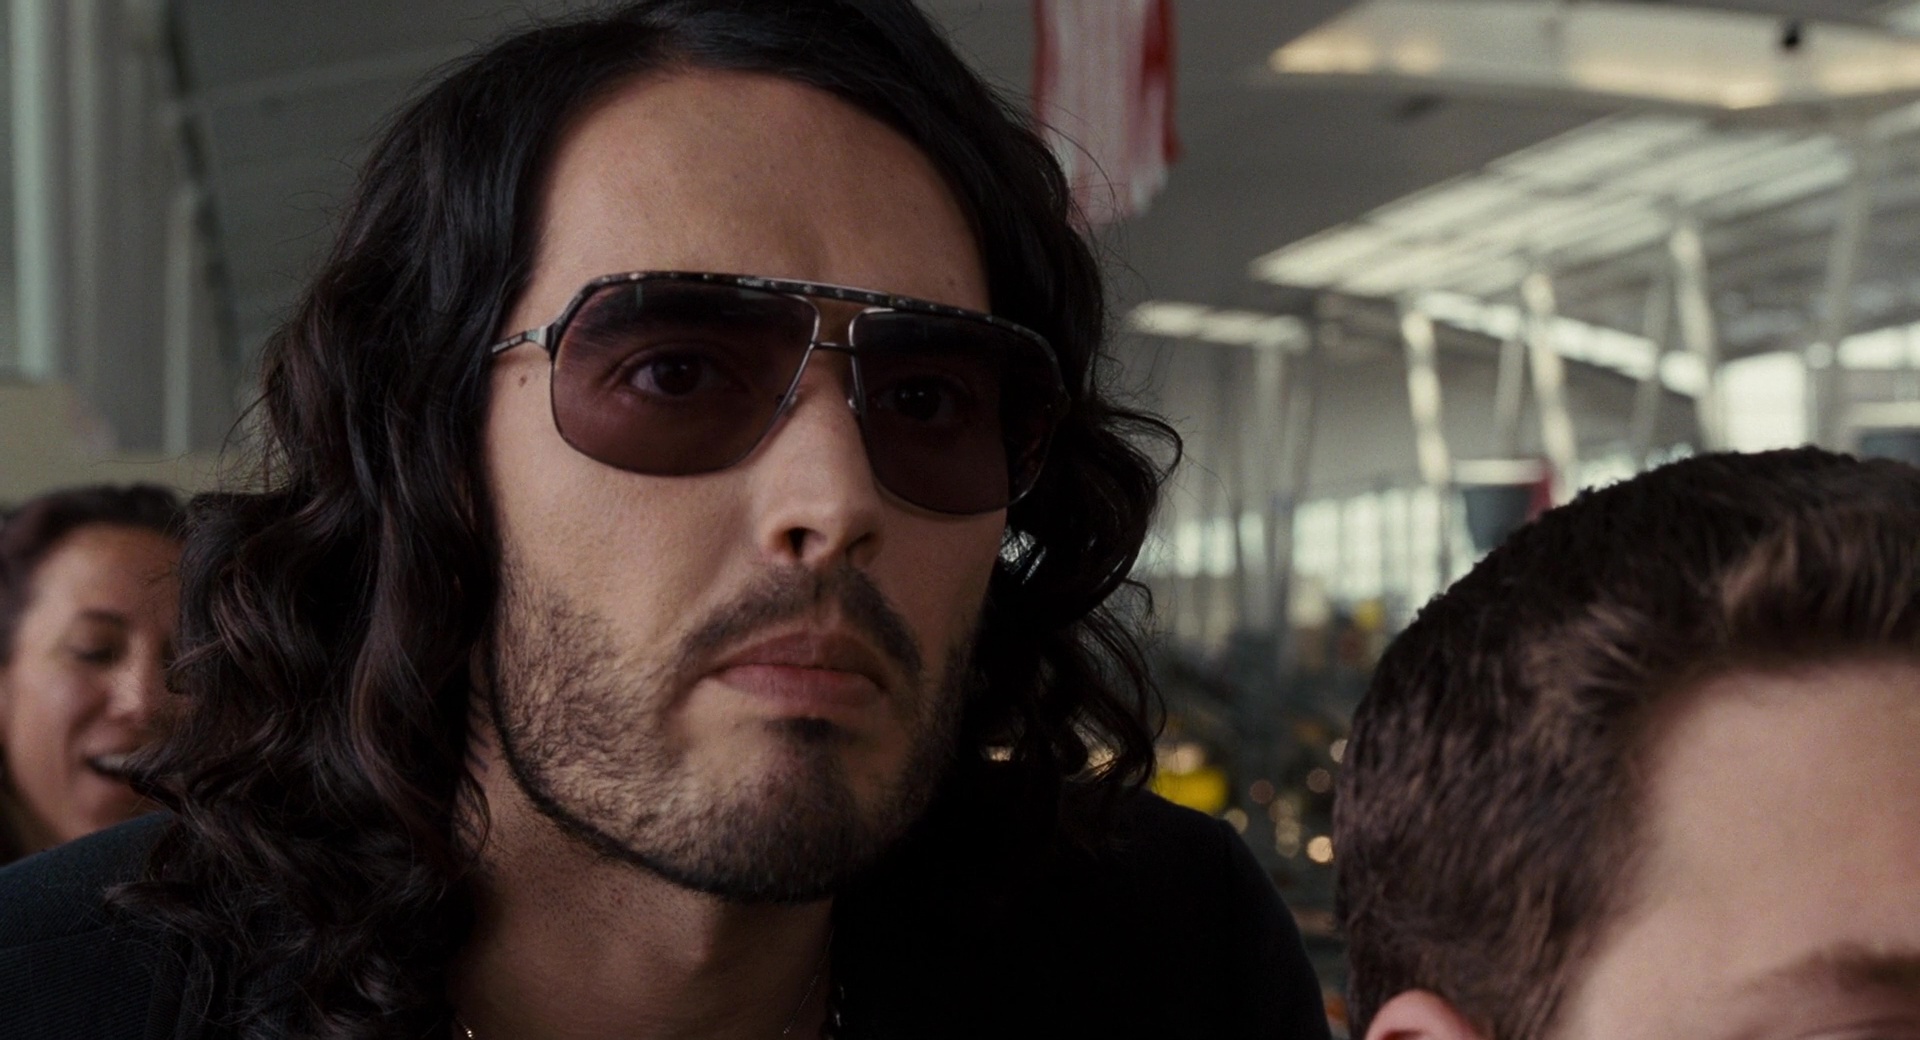 Alexander McQueen 4099 Sunglasses Worn by Russell Brand in Get Him to the G...